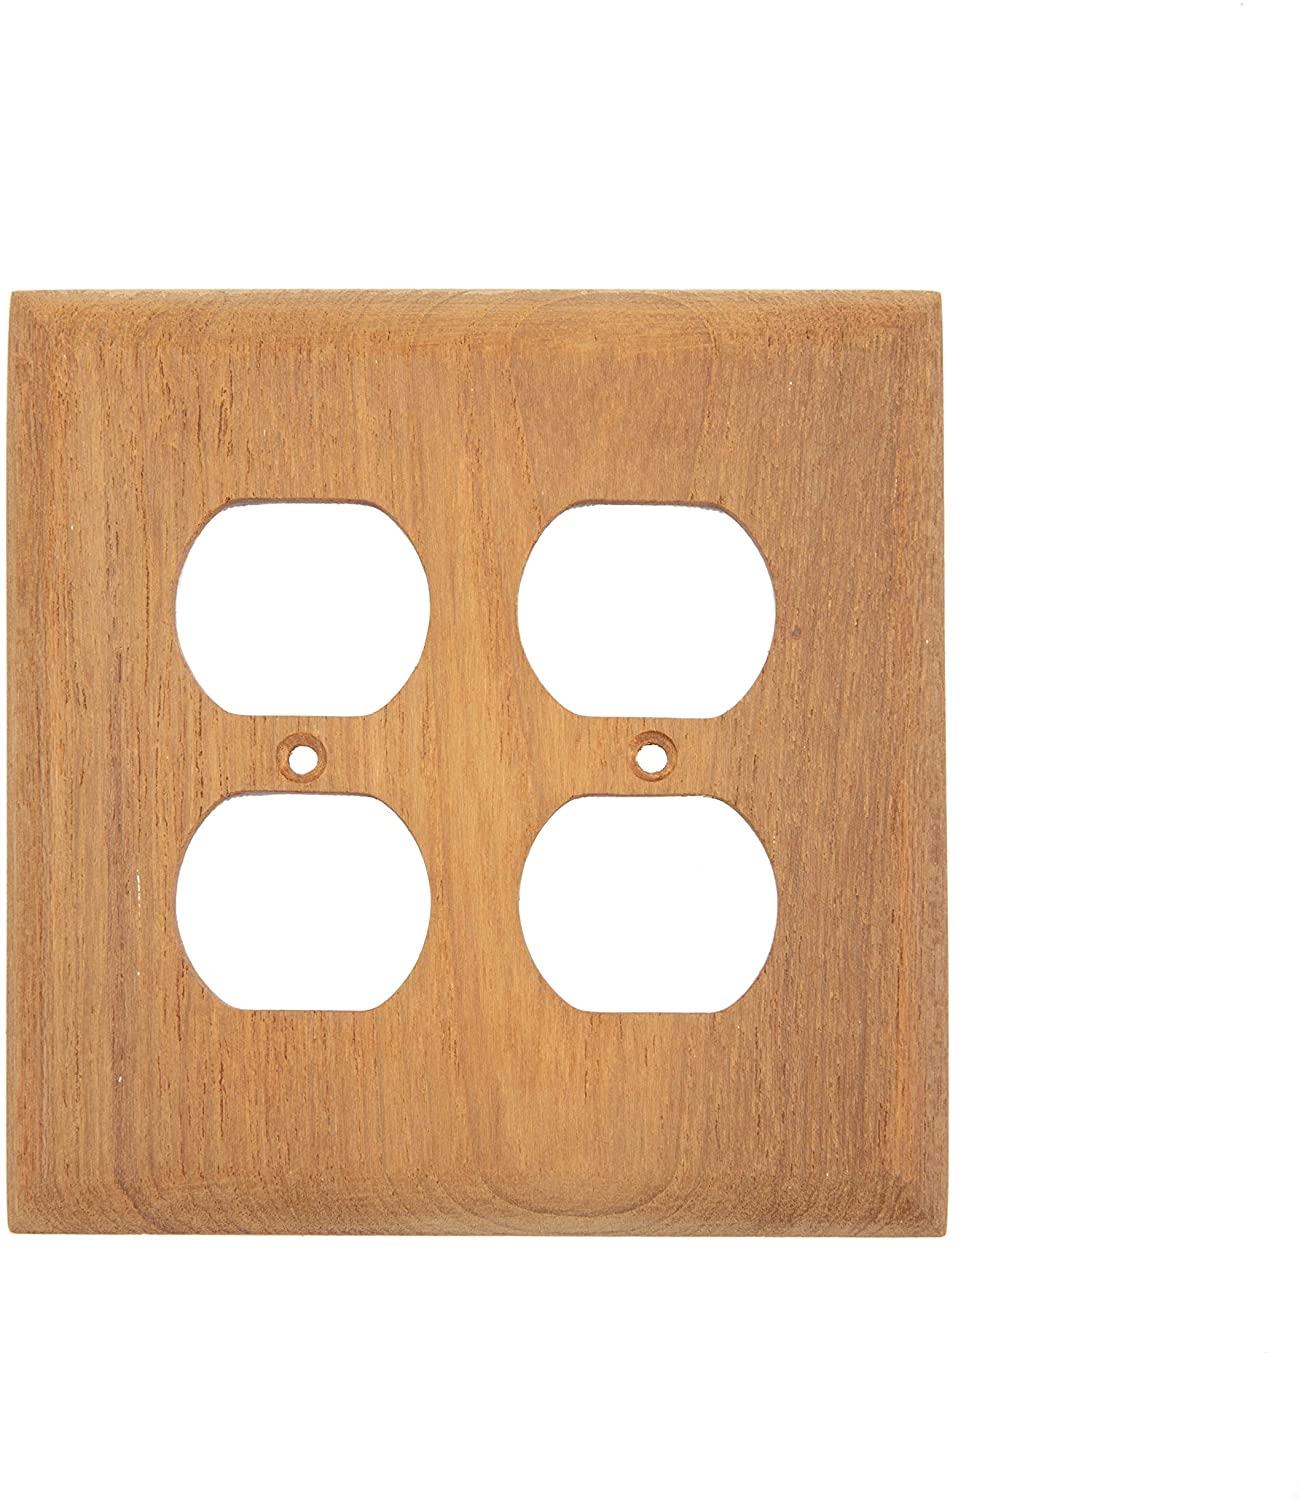 MISC Teak 2 Duplex Receptacle Cover/Plate Cover Includes Hardware